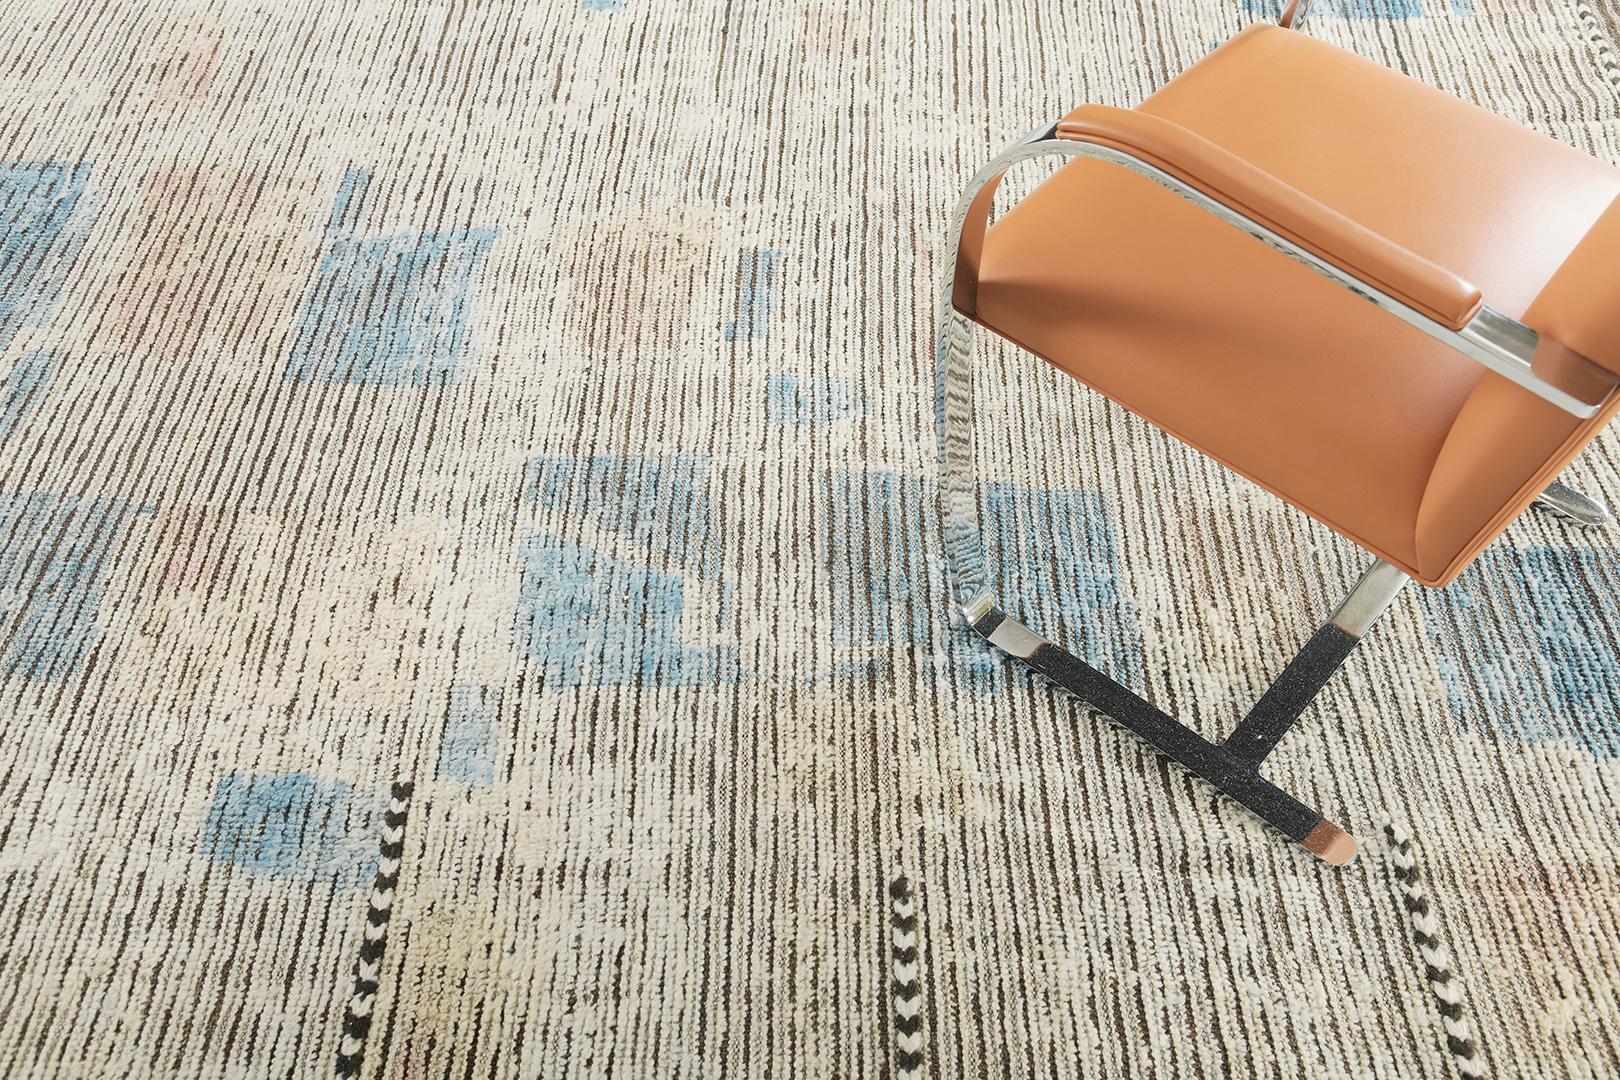 Kella displays an awe-inspiring sophisticated vibe that features azure blue patches that is spread fascinatingly along the textured earth toned rug. Borders accentuated by brown tassels brings out the welcoming vibe of this work of art. Mehraban's